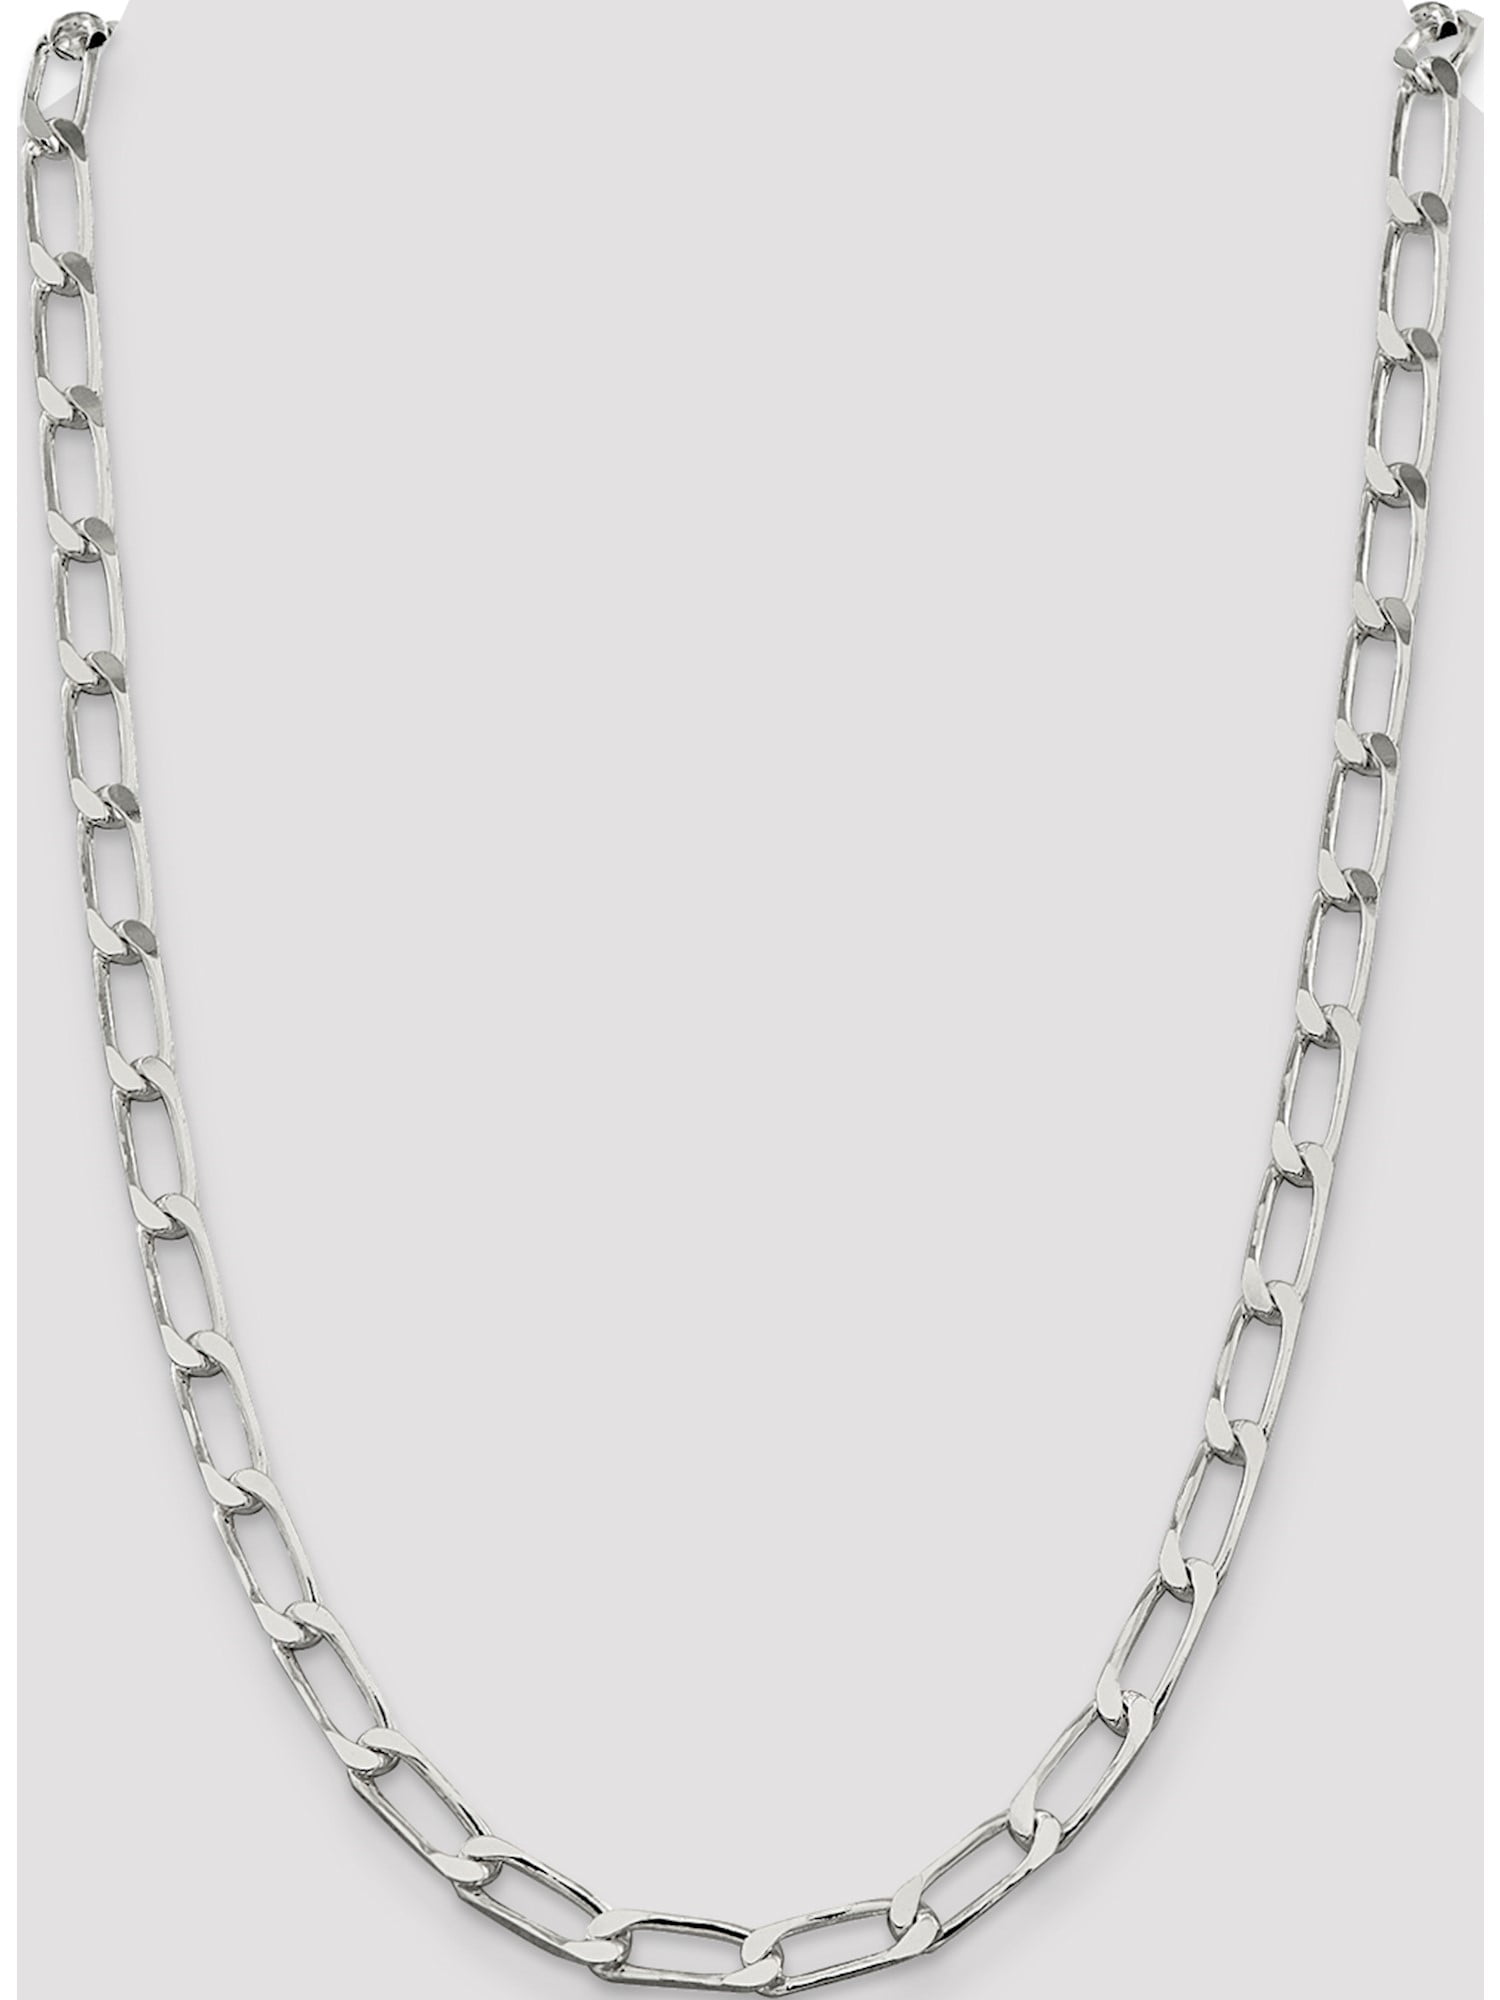 Sterling Silver 6.5 MM Polished Long Curb Chain Necklace